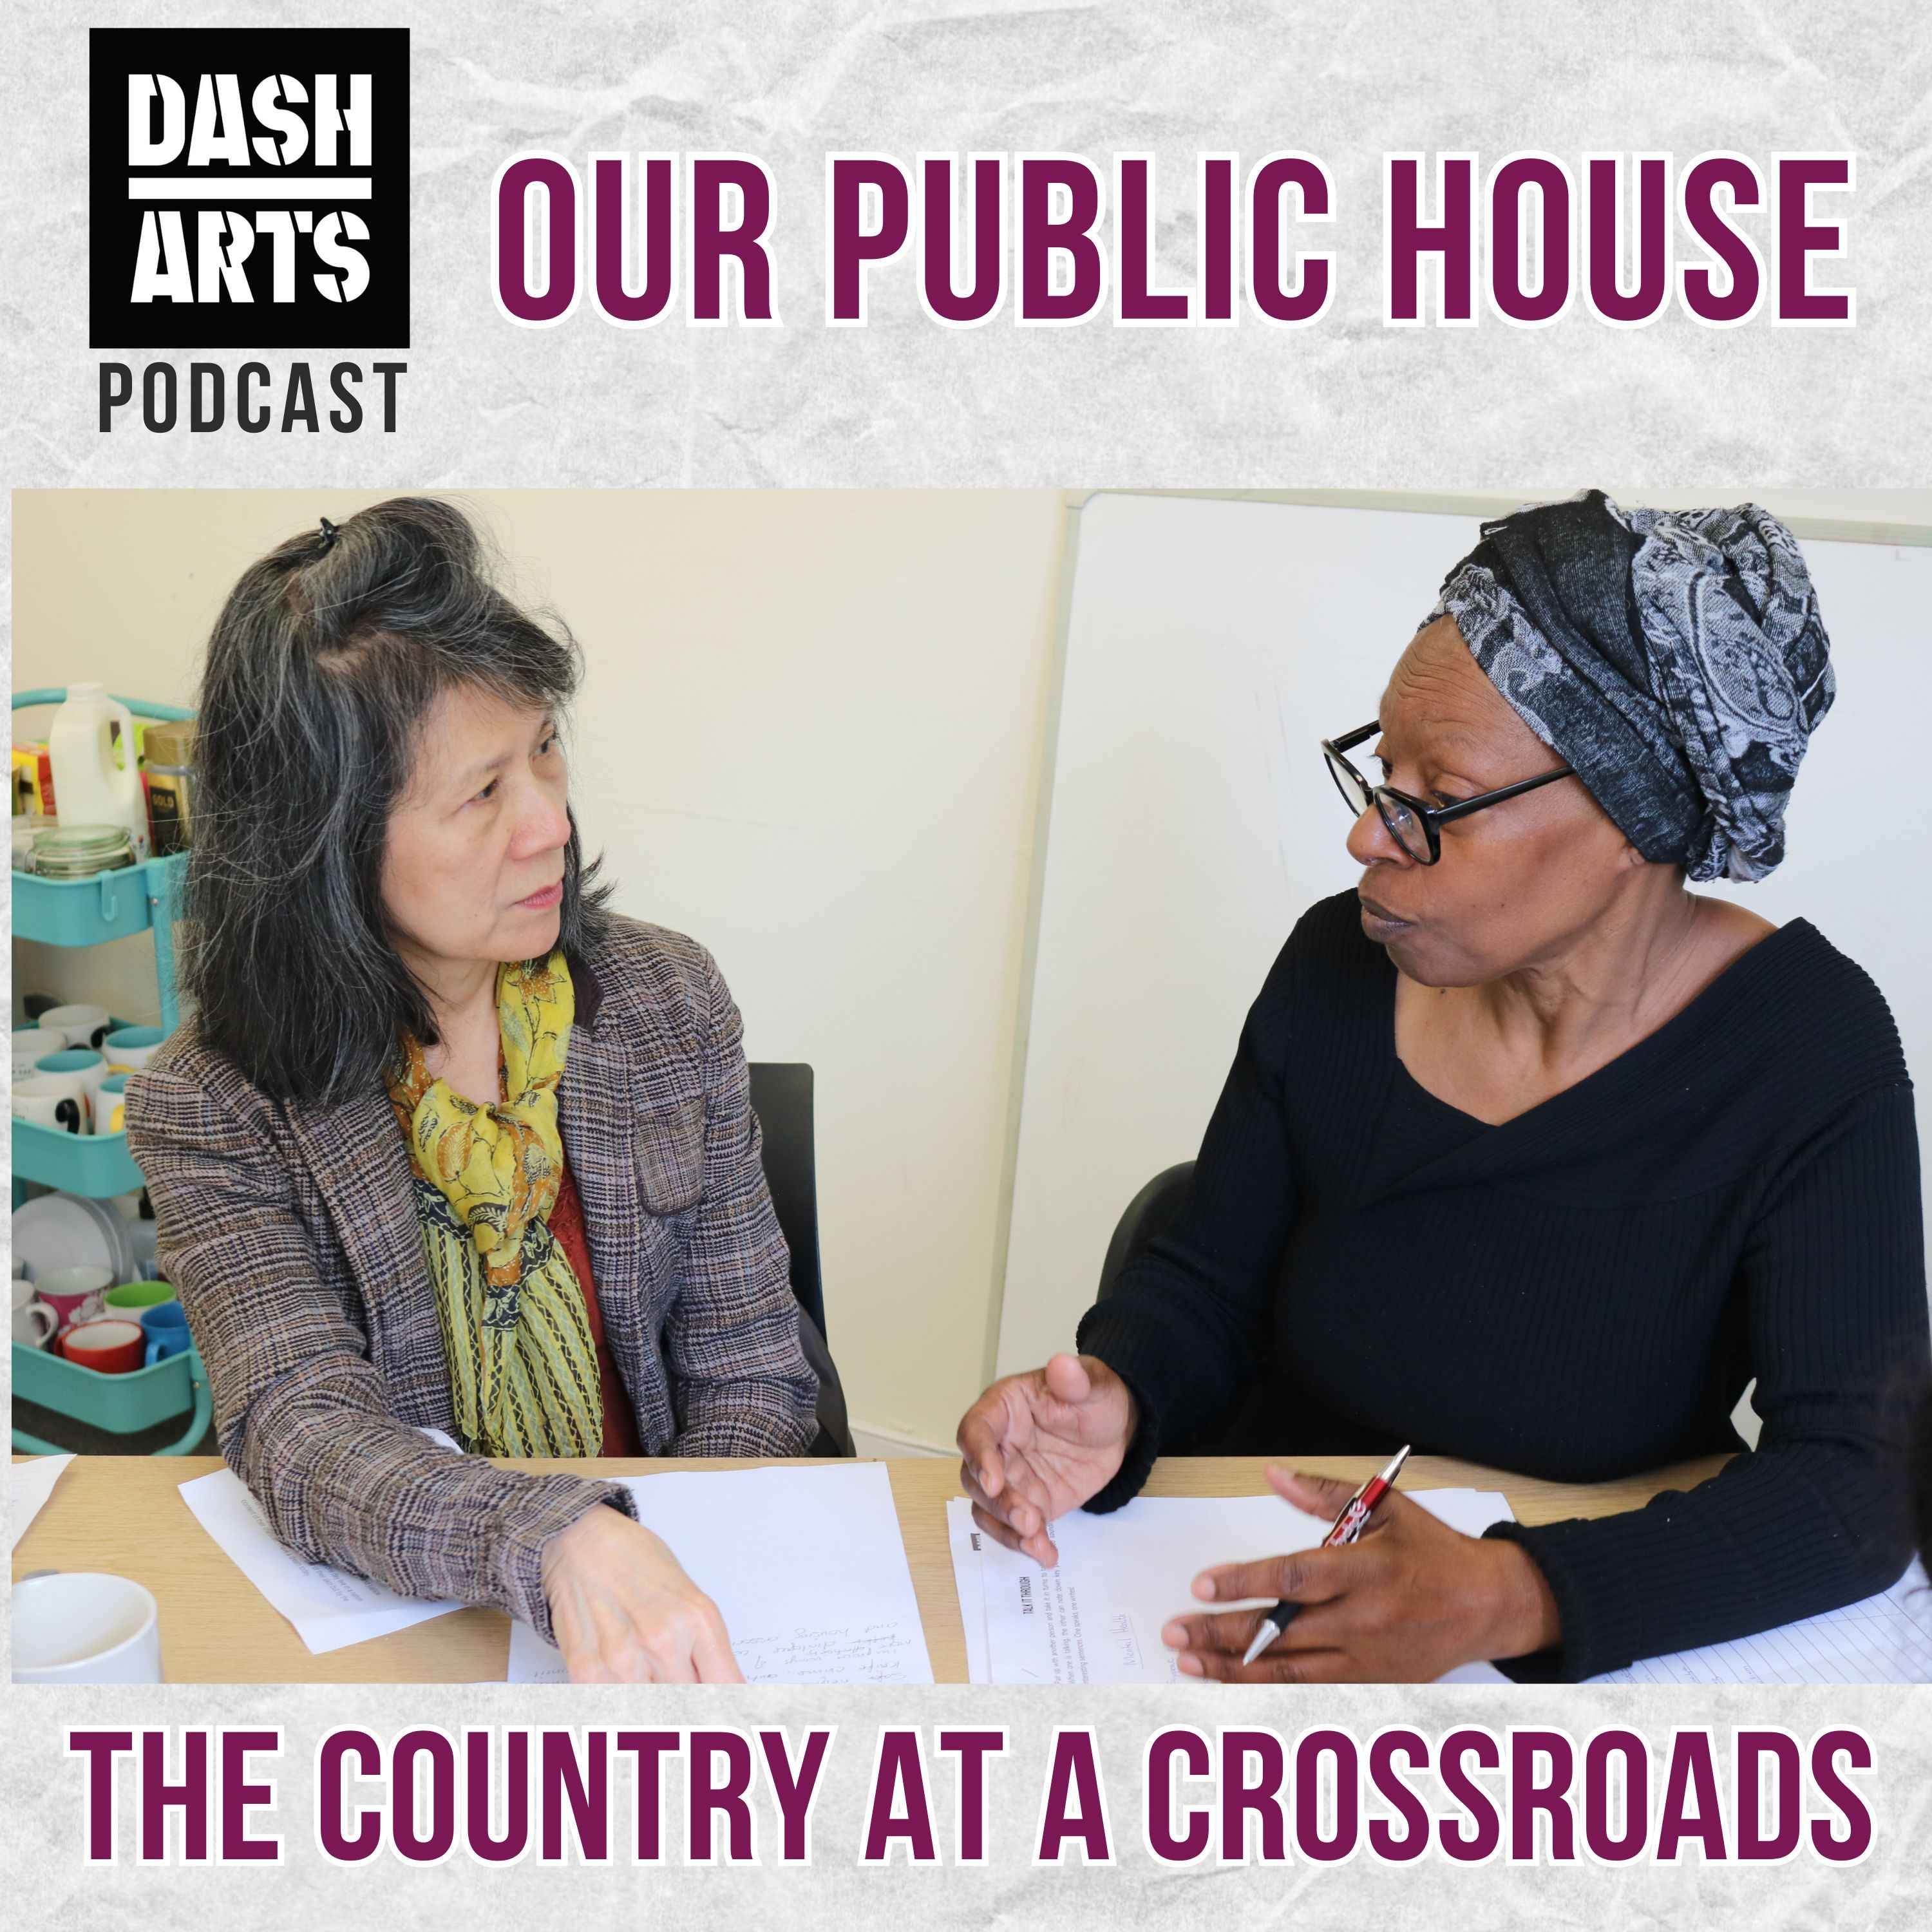 Our Public House: The Country at a Crossroads